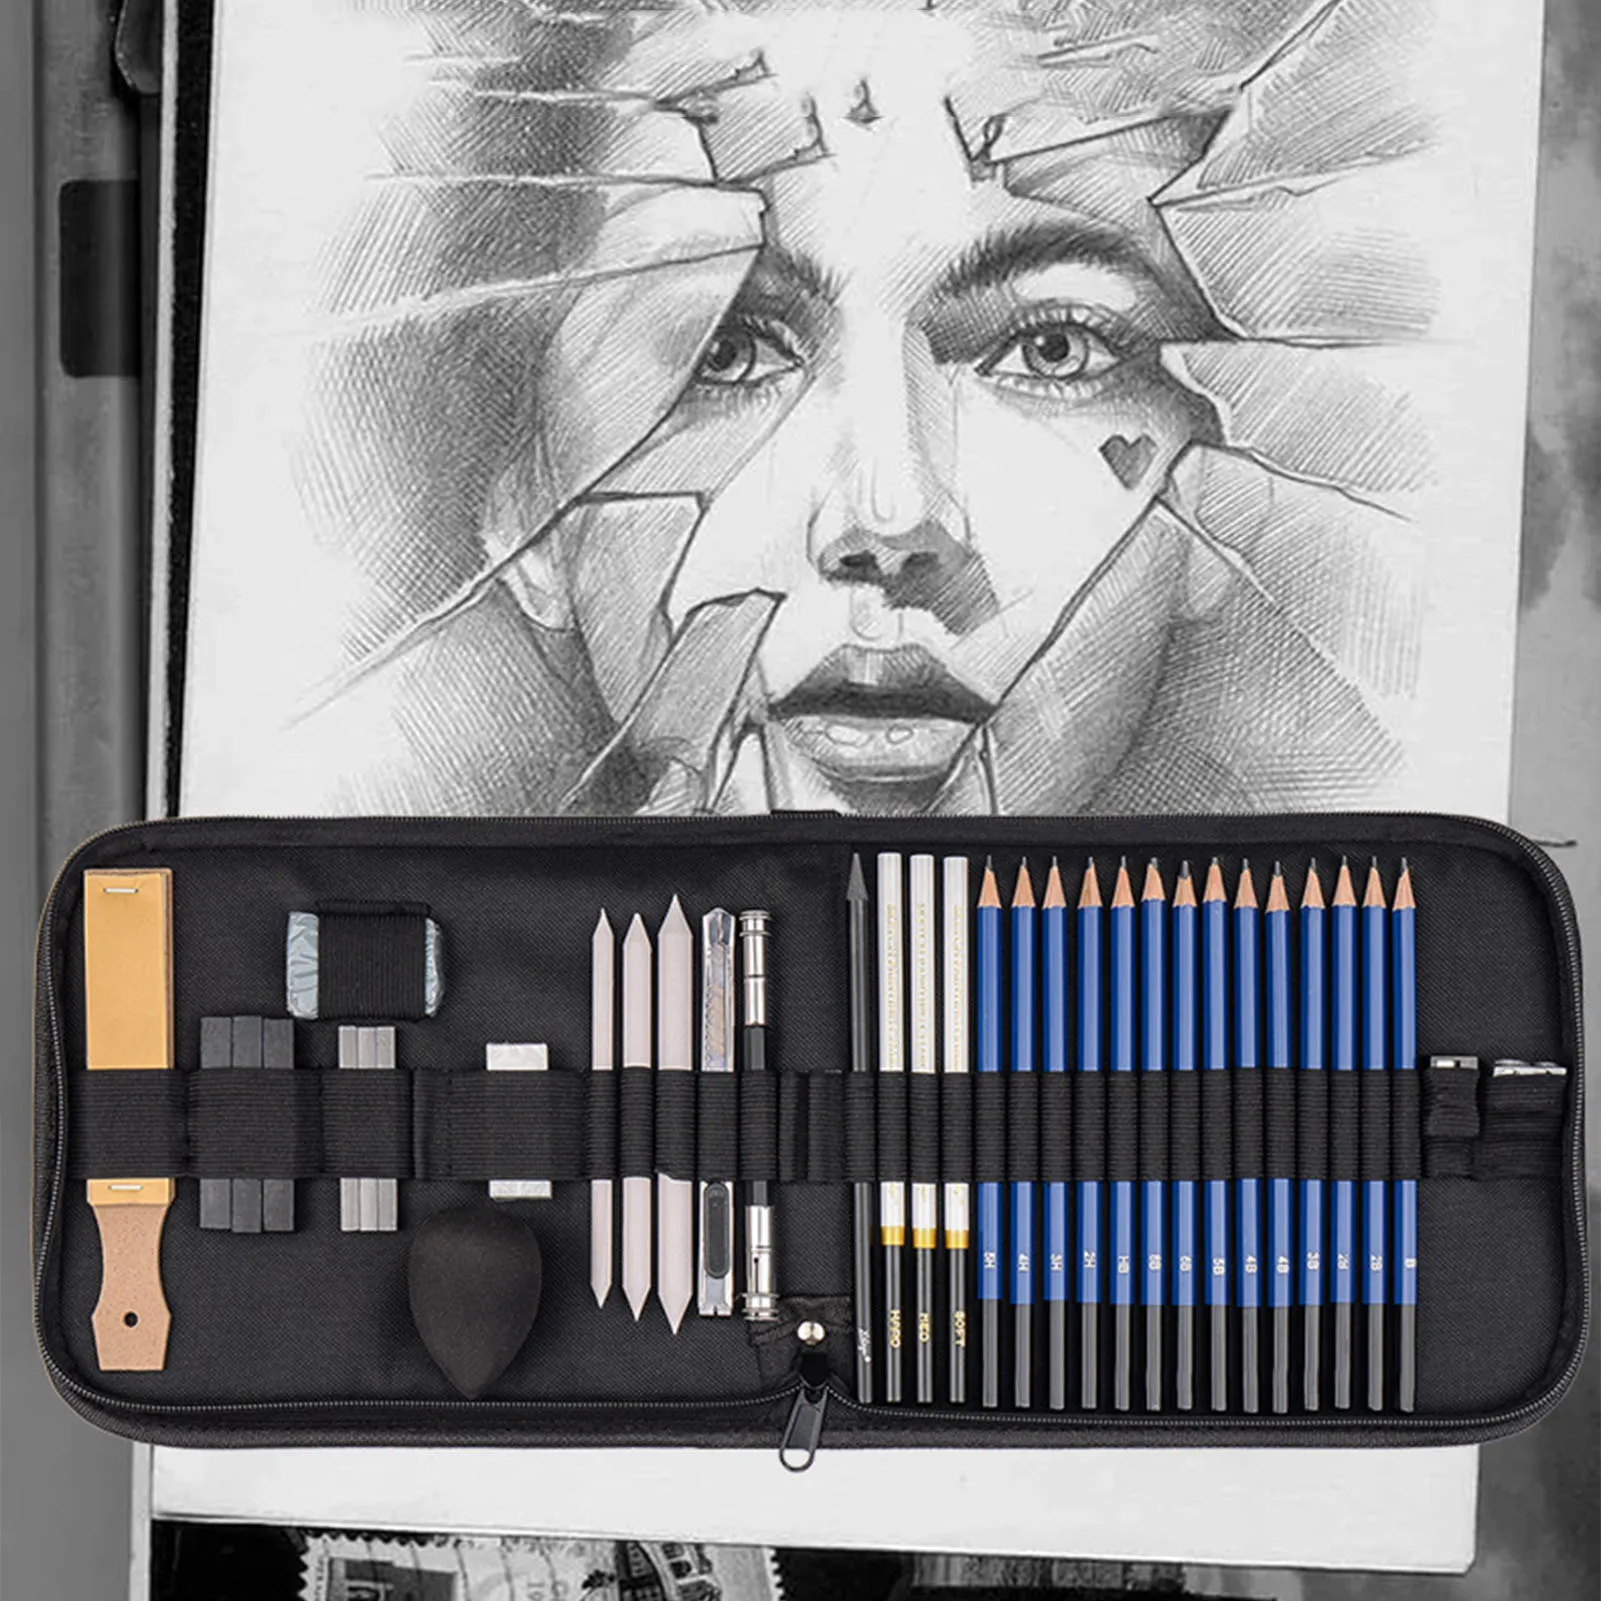 https://ae01.alicdn.com/kf/S1ce2b2ce4bfb4532bcb0570d7335d9406/37-Pcs-Art-Supplies-Drawing-Kit-Sketching-And-Charcoal-Pencils-Travel-Case-For-Painting-Lovers-Beginners.jpg